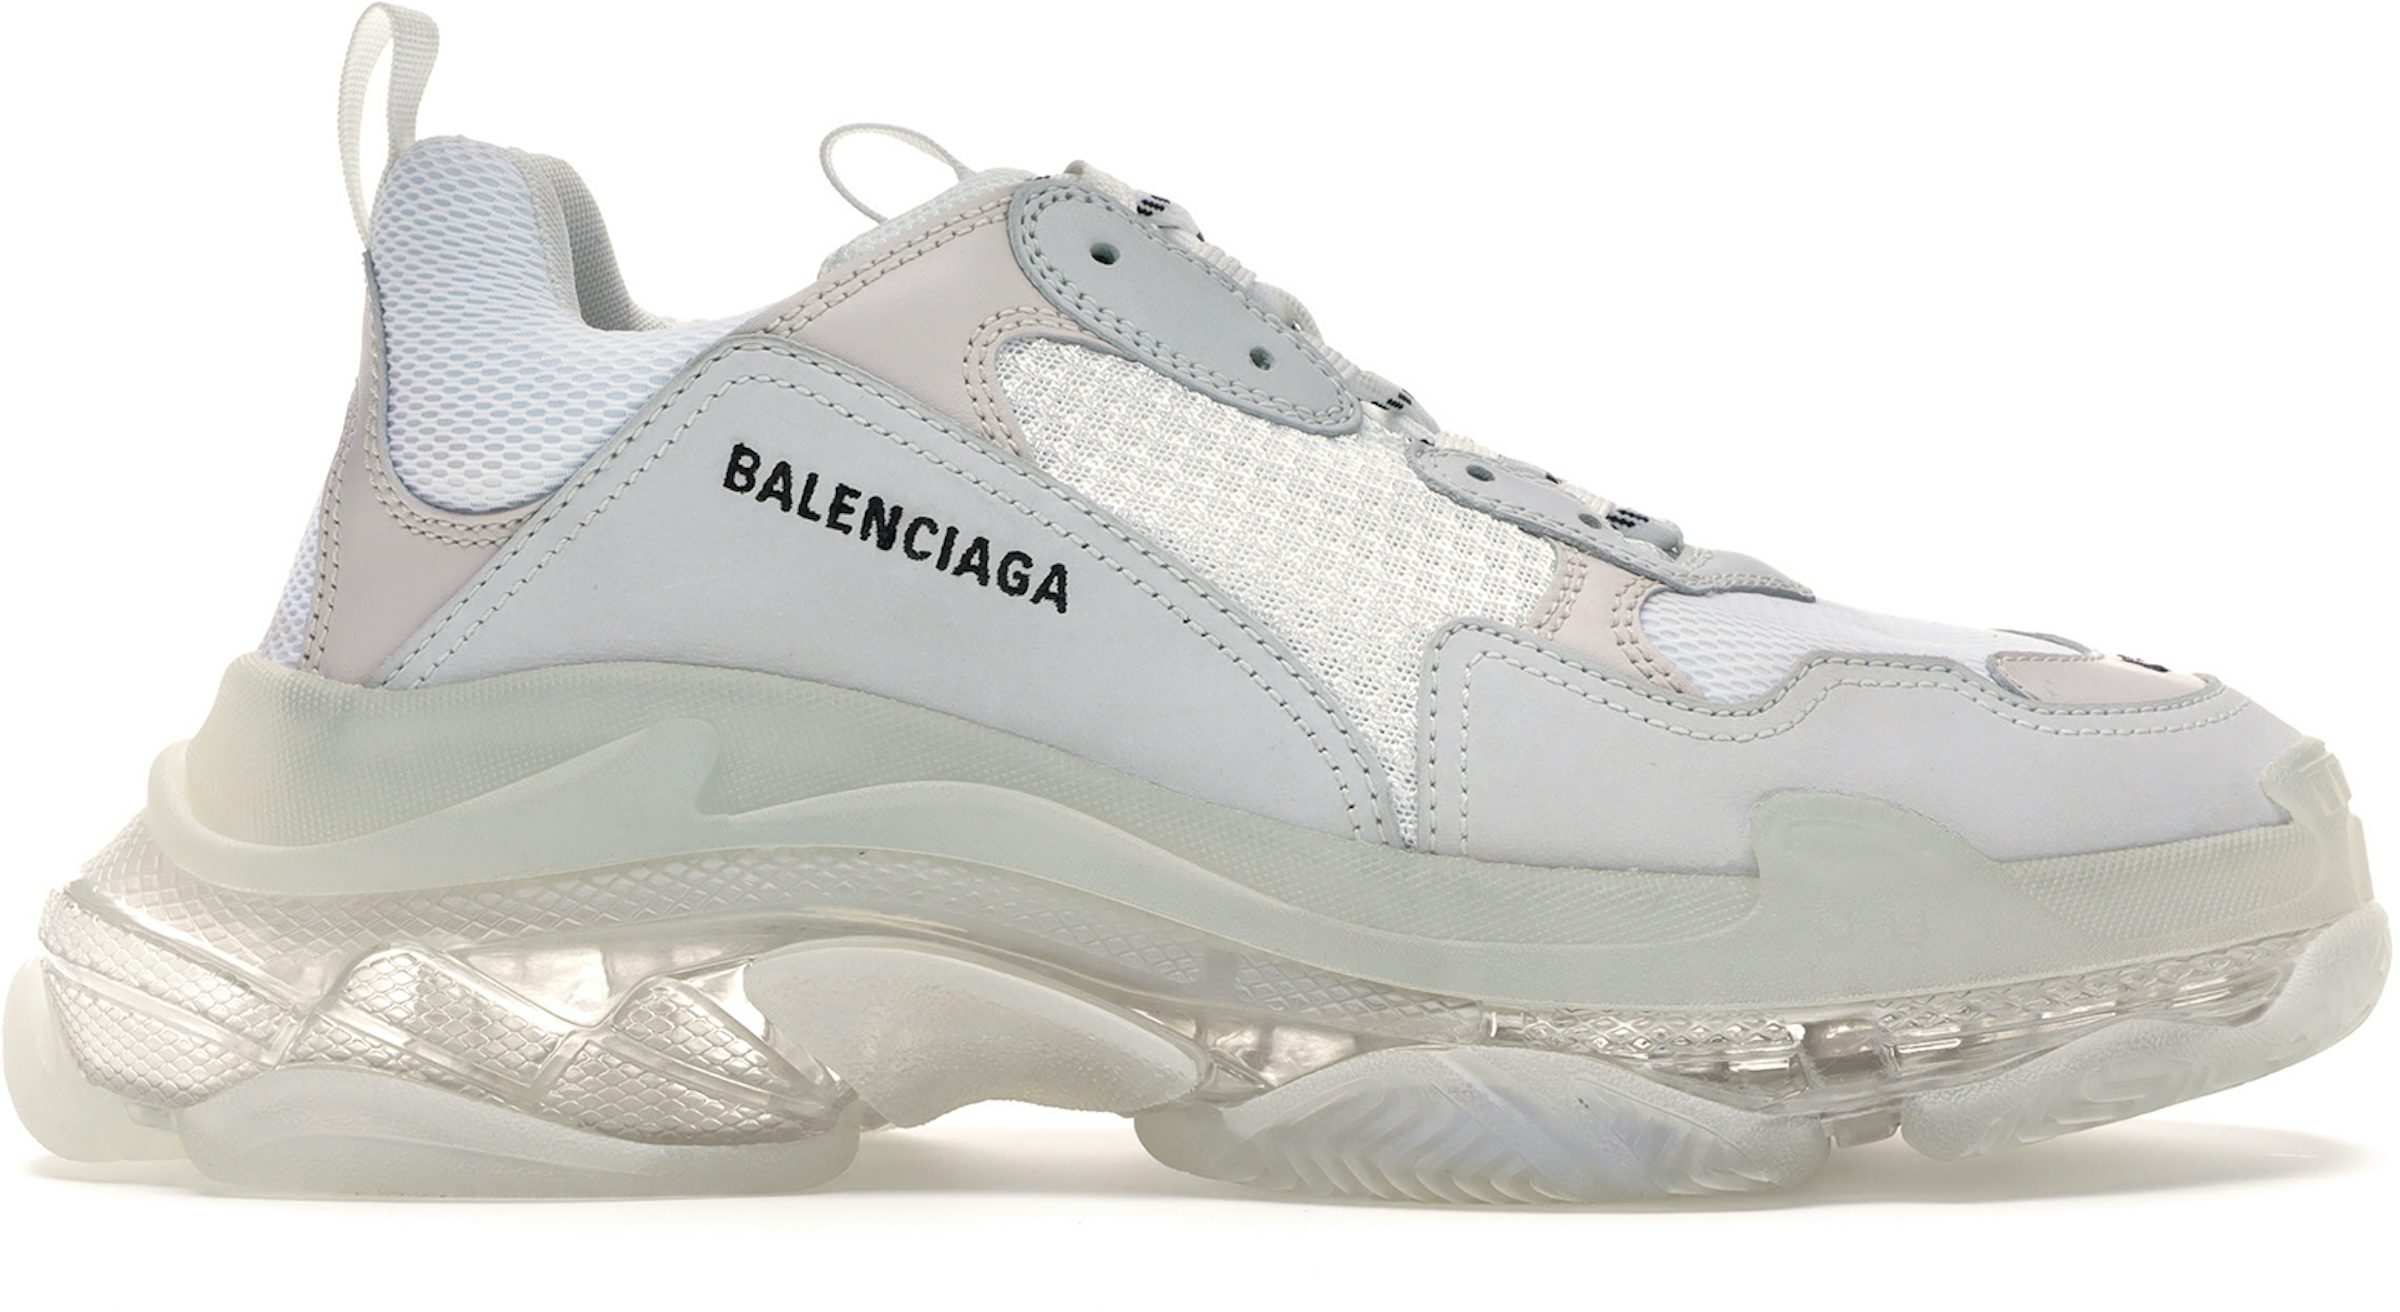 Buy Balenciaga Shoes and Sneakers - StockX